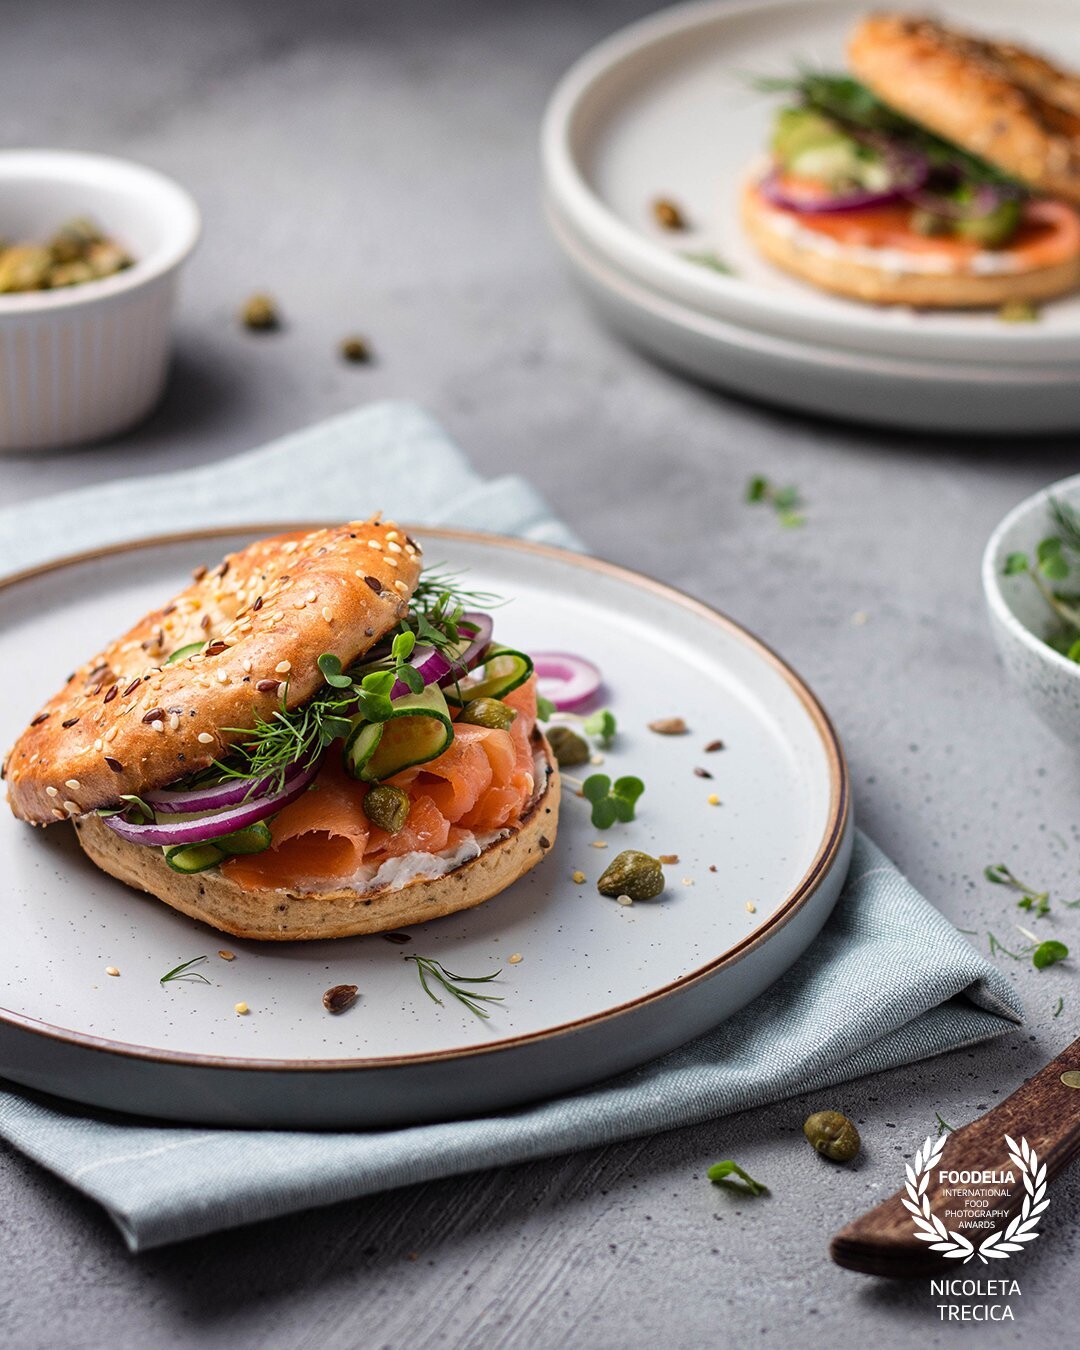 I have had the  idea of this shot in my mind for a while and I wanted to practice with food styling, so the salmon bagels offered me this opportunity.